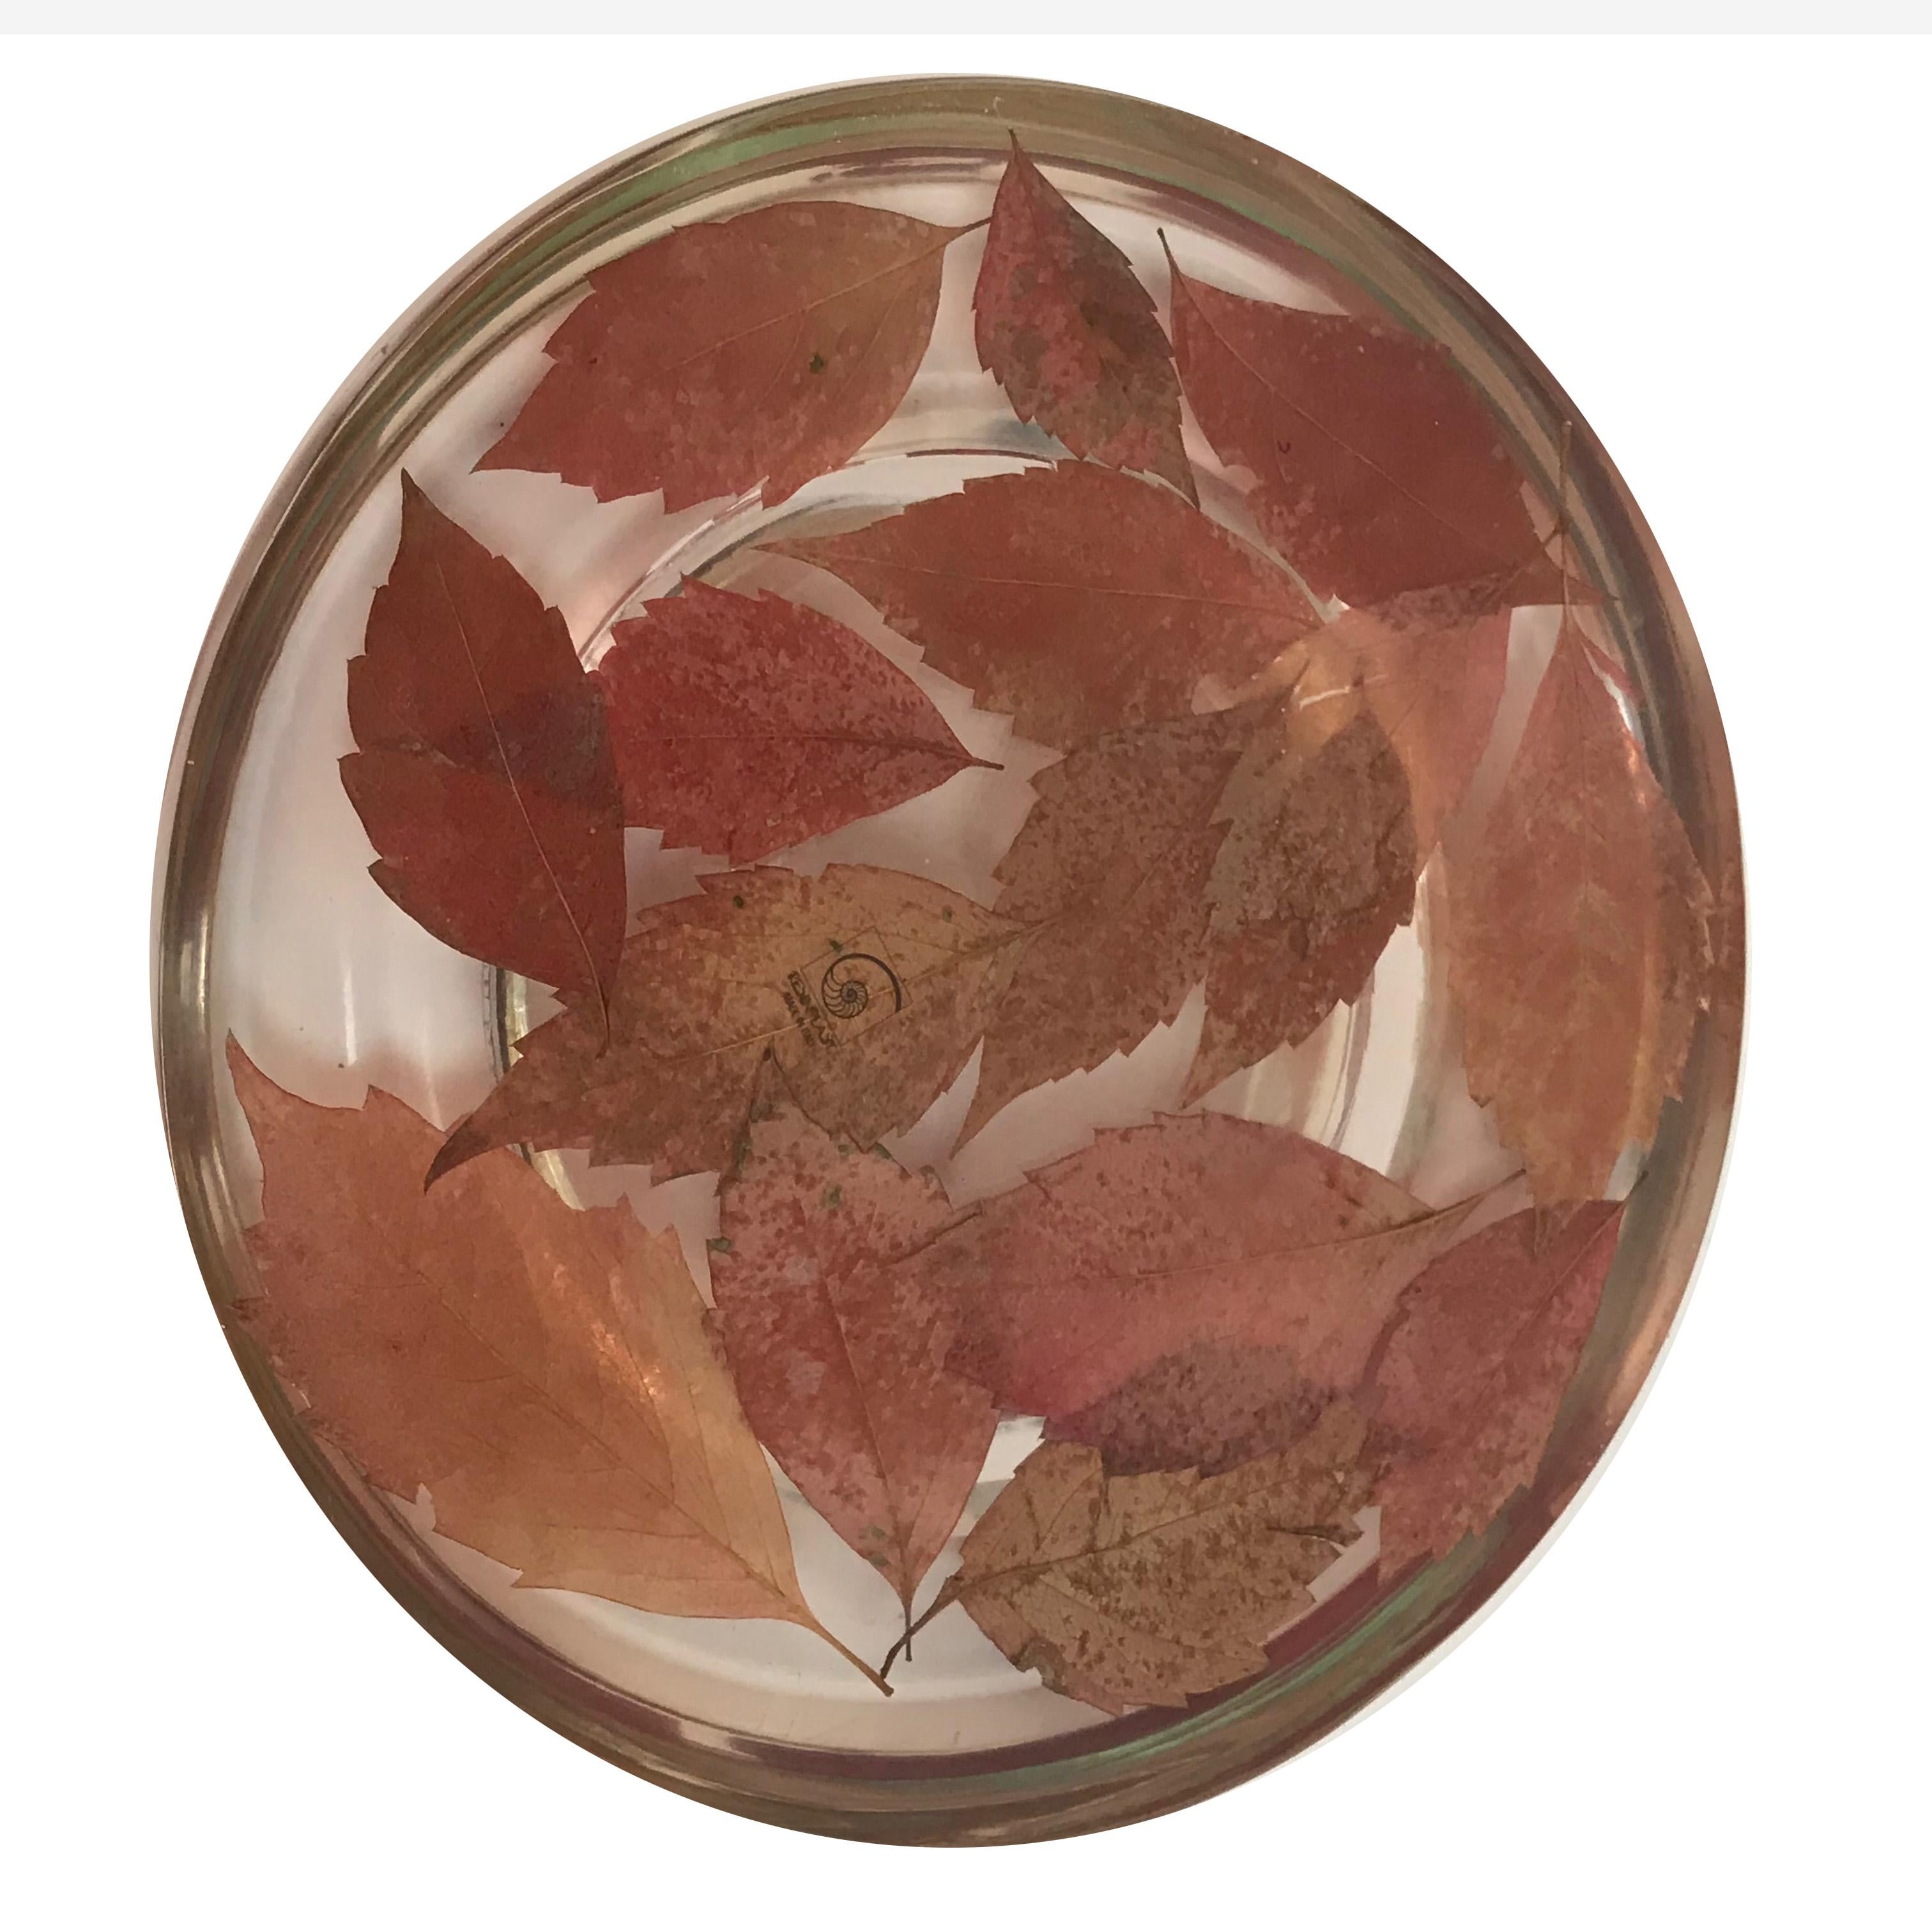 Resin Bowl Centerpiece with Leaves Inside, Made in Italy, 1970s For Sale 2